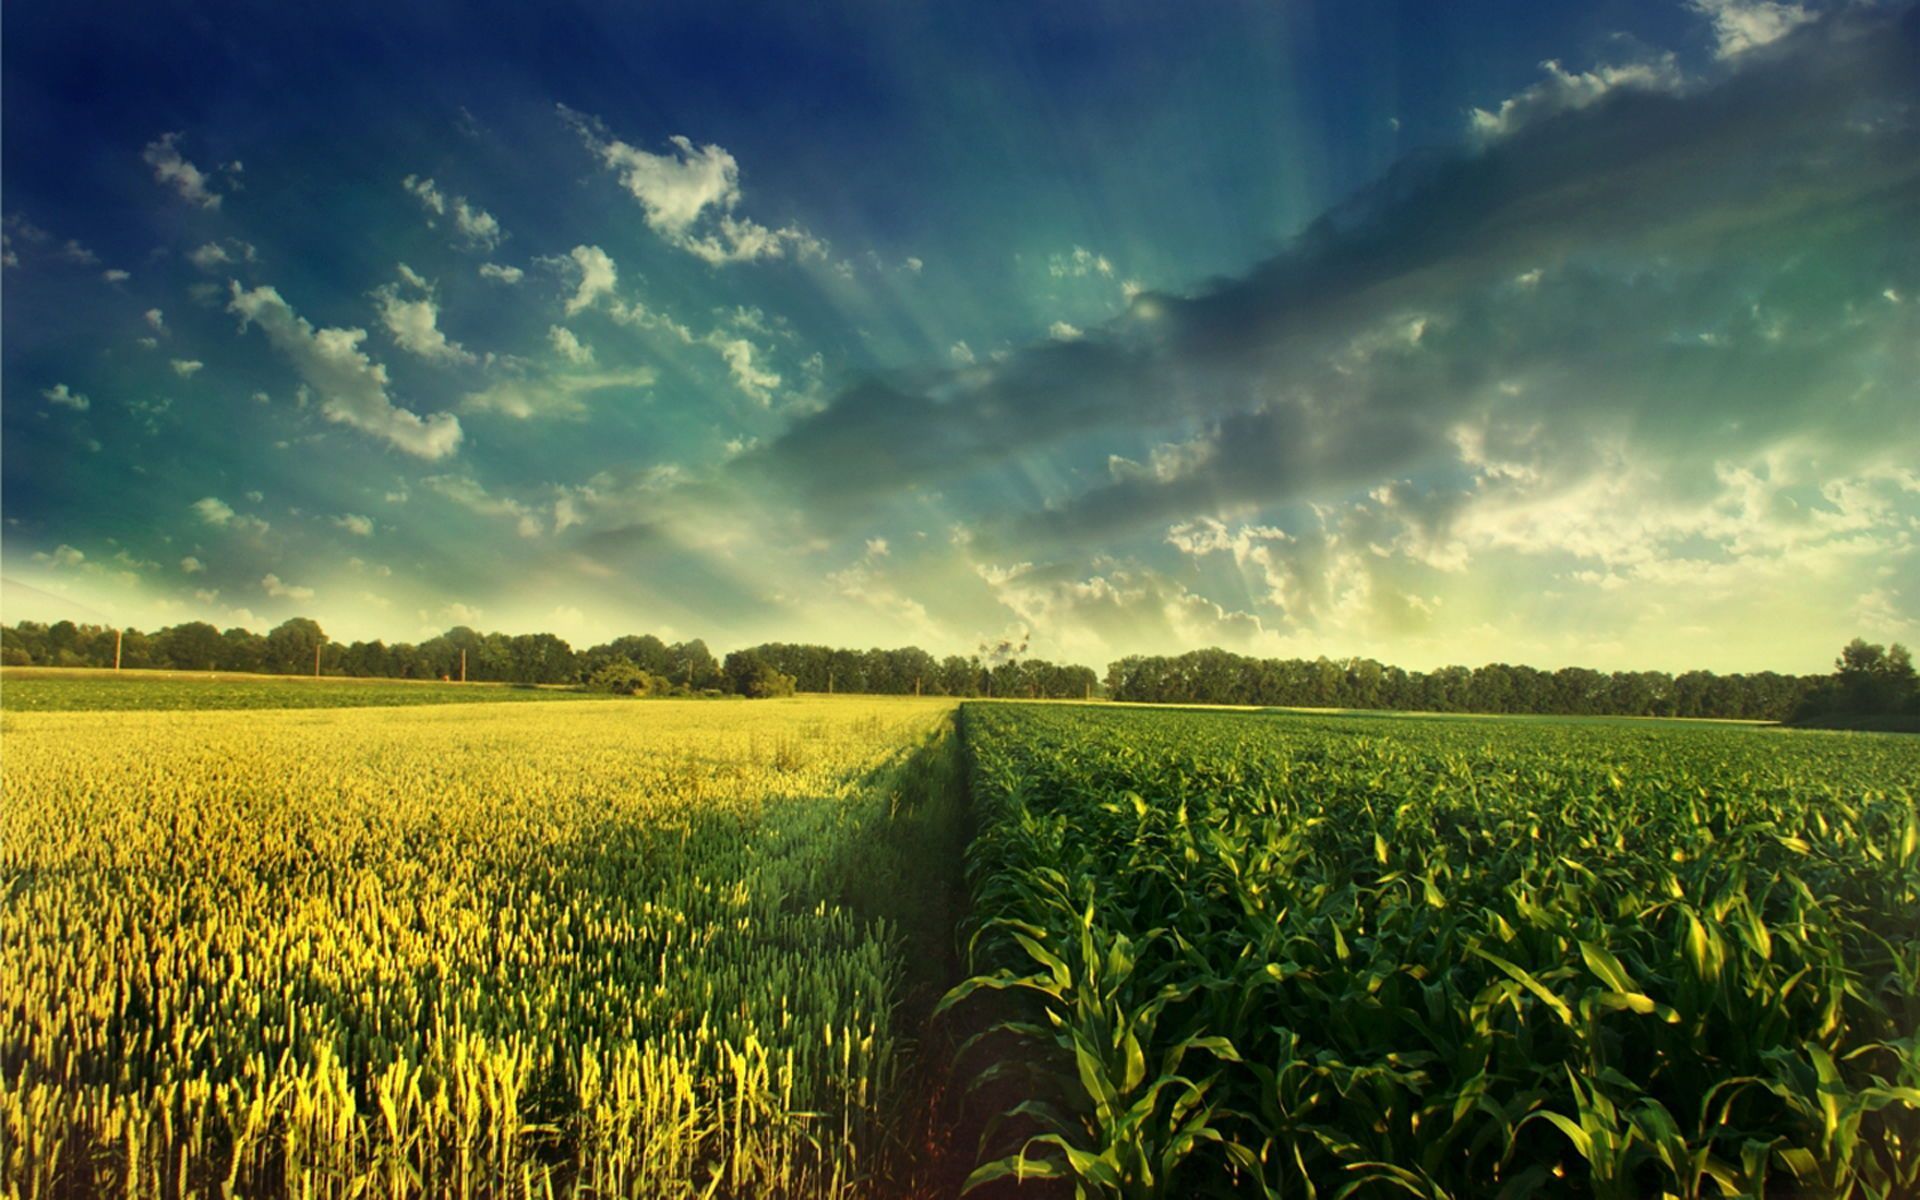 Field HD Wallpapers | Green Fields Images | Cool Wallpapers